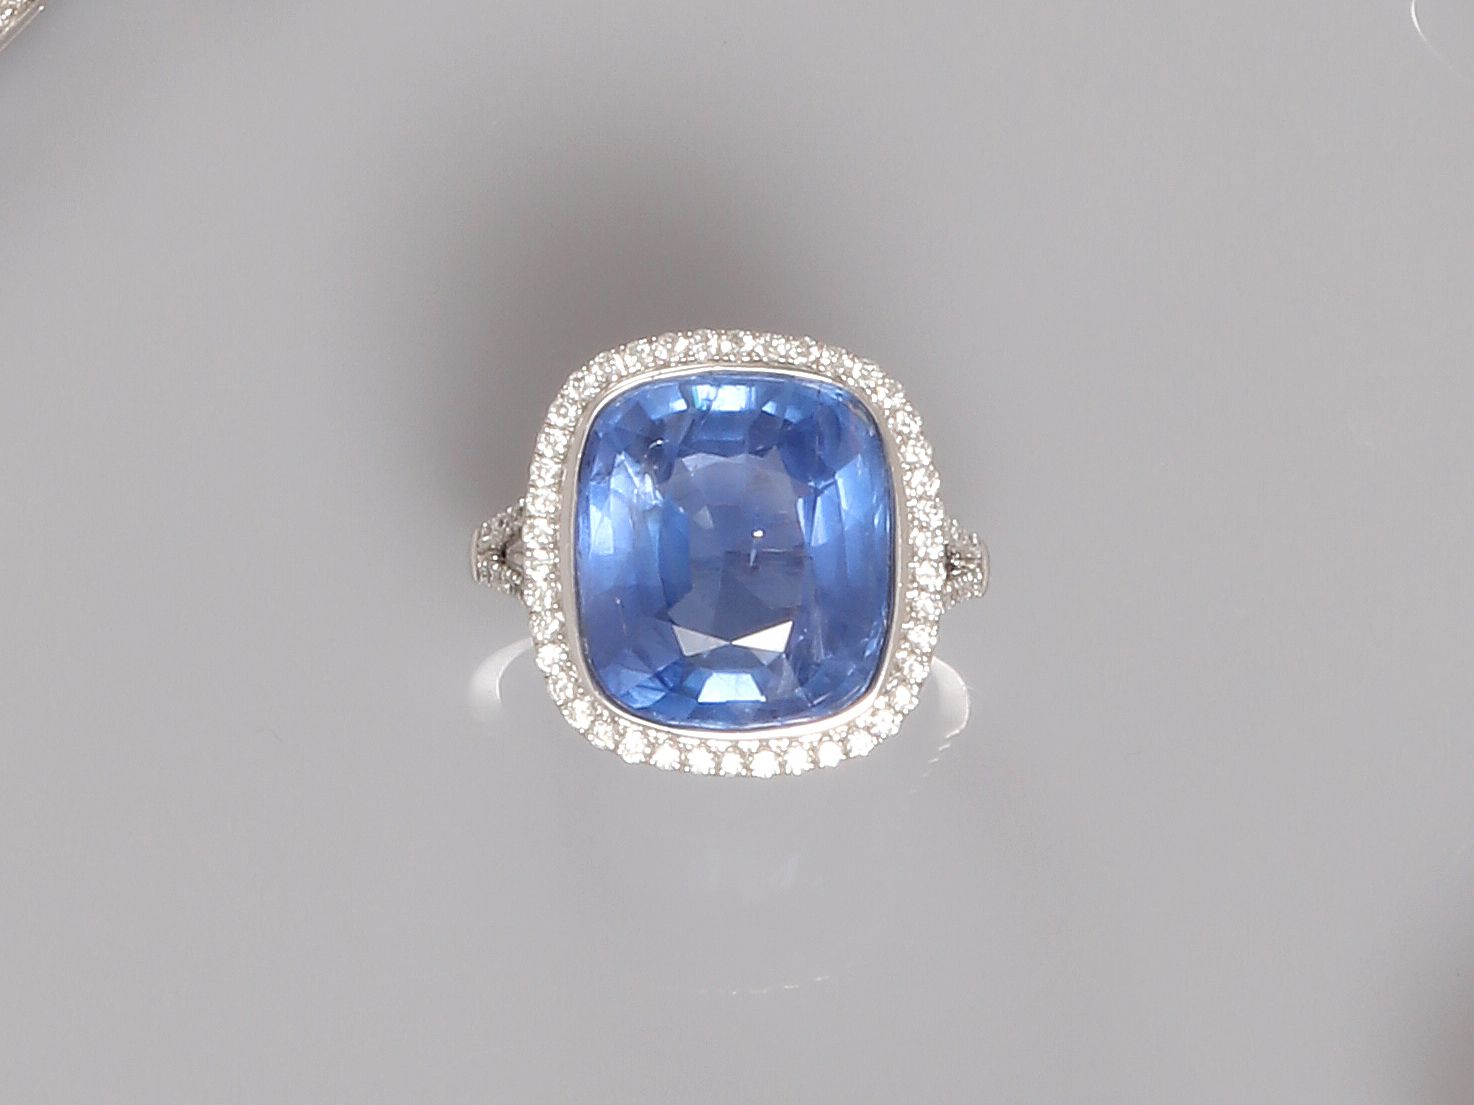 Null Ring in , platinum 900 MM, set with a cushion-cut sapphire weighing 10.76 c&hellip;